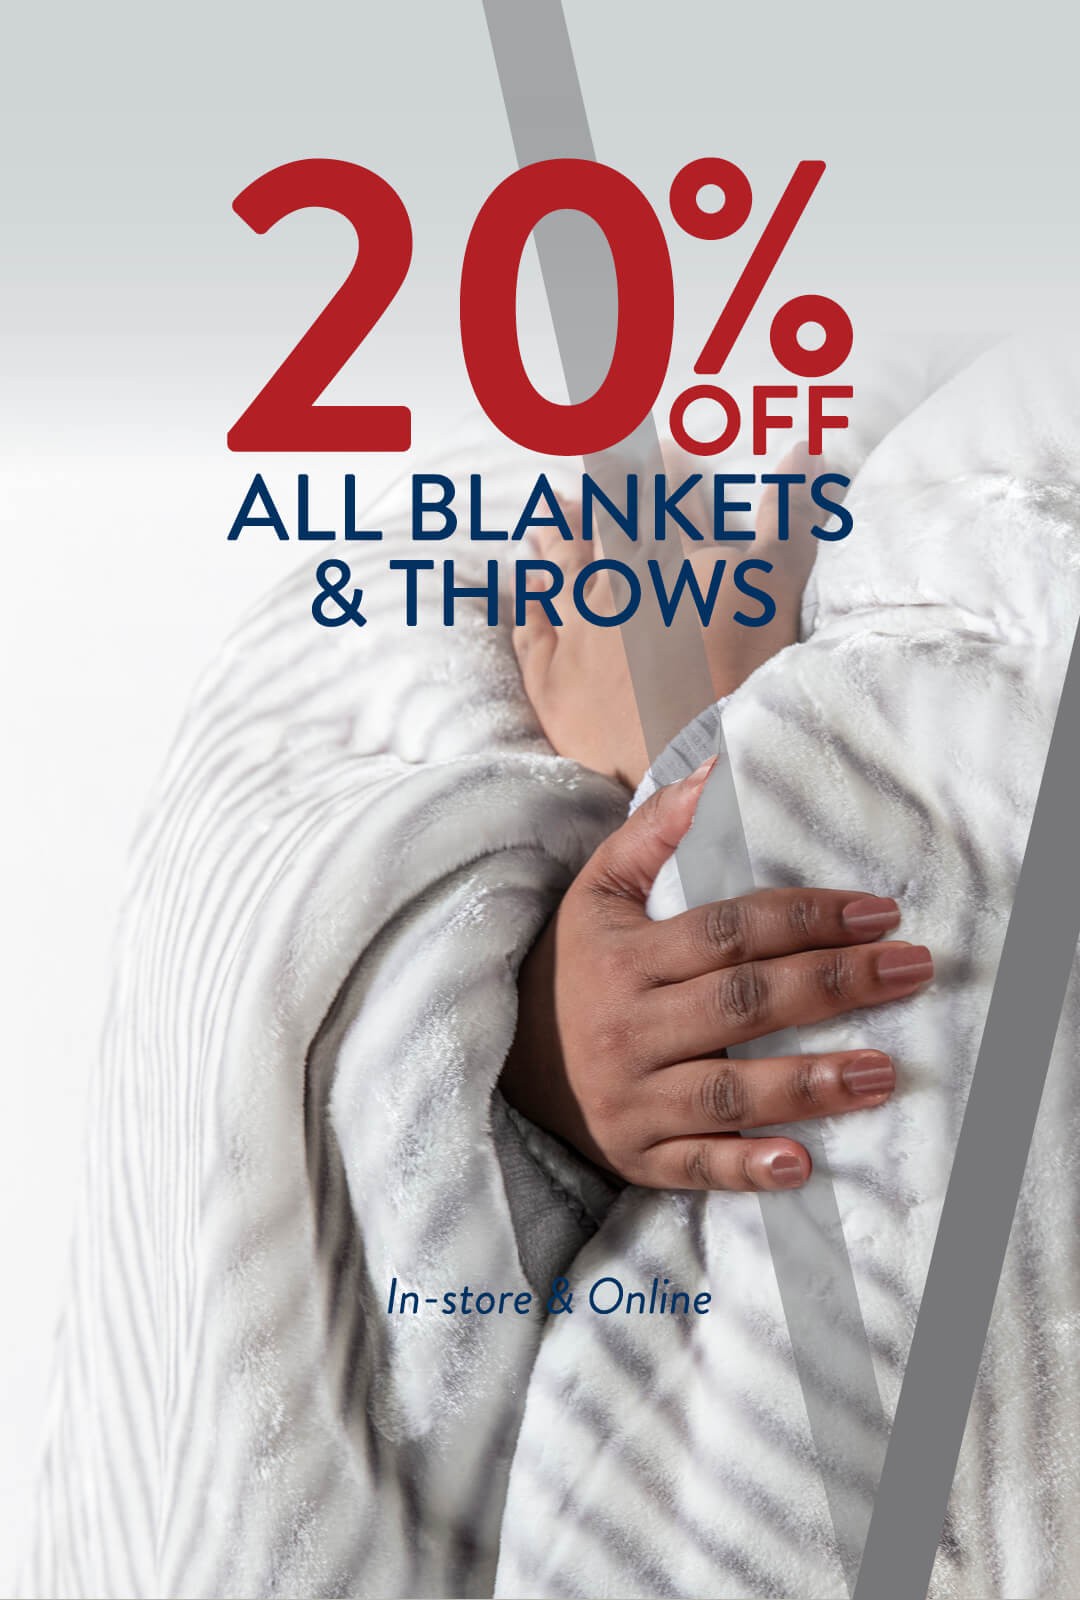 20% OFF SELECTED BLANKETS